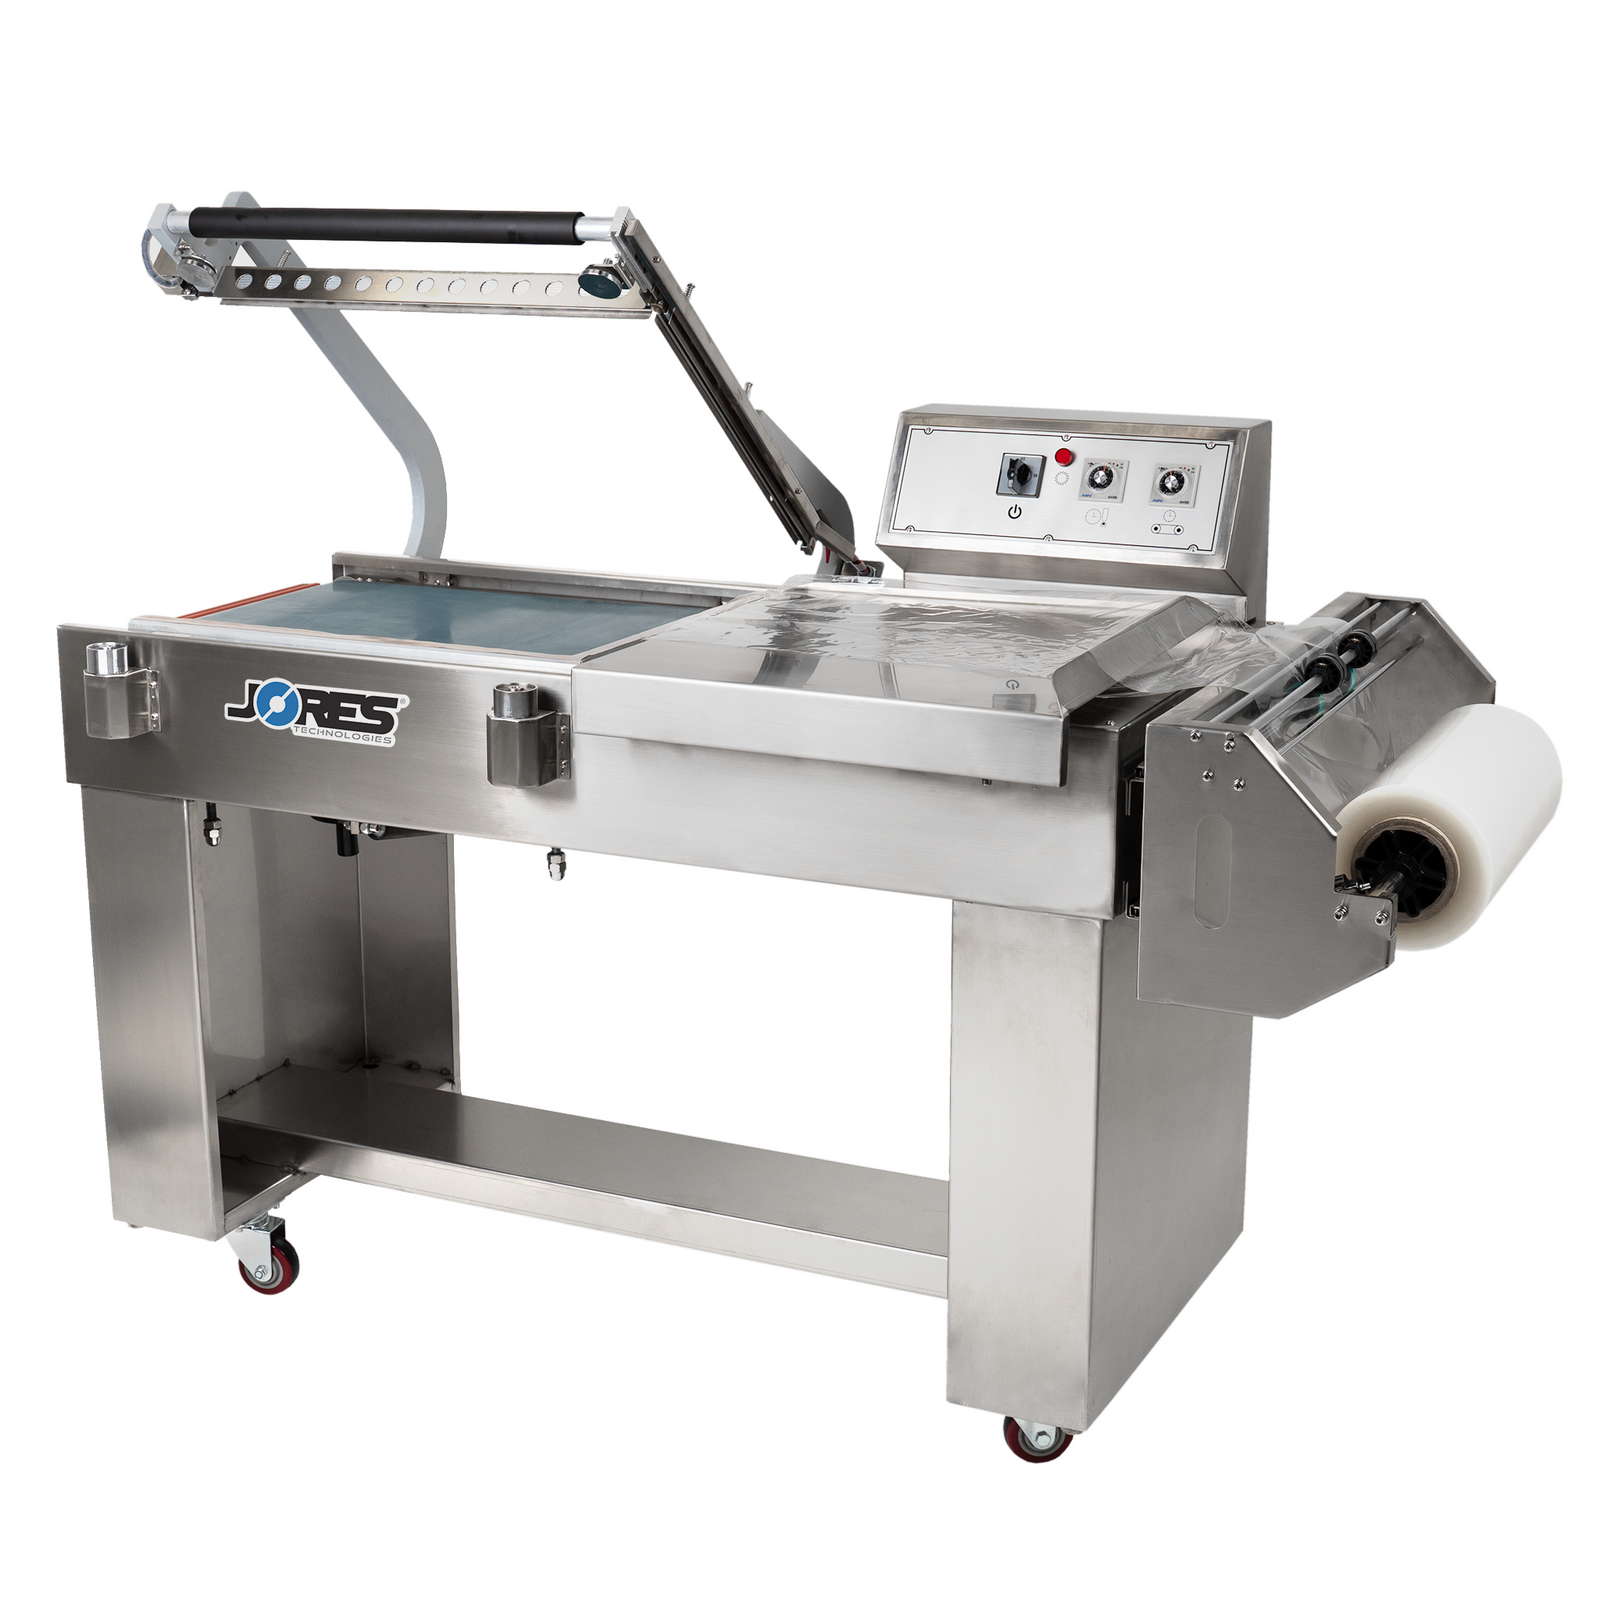 Stainless steel semi-automatic L bar heat sealer with conveyor for packaging